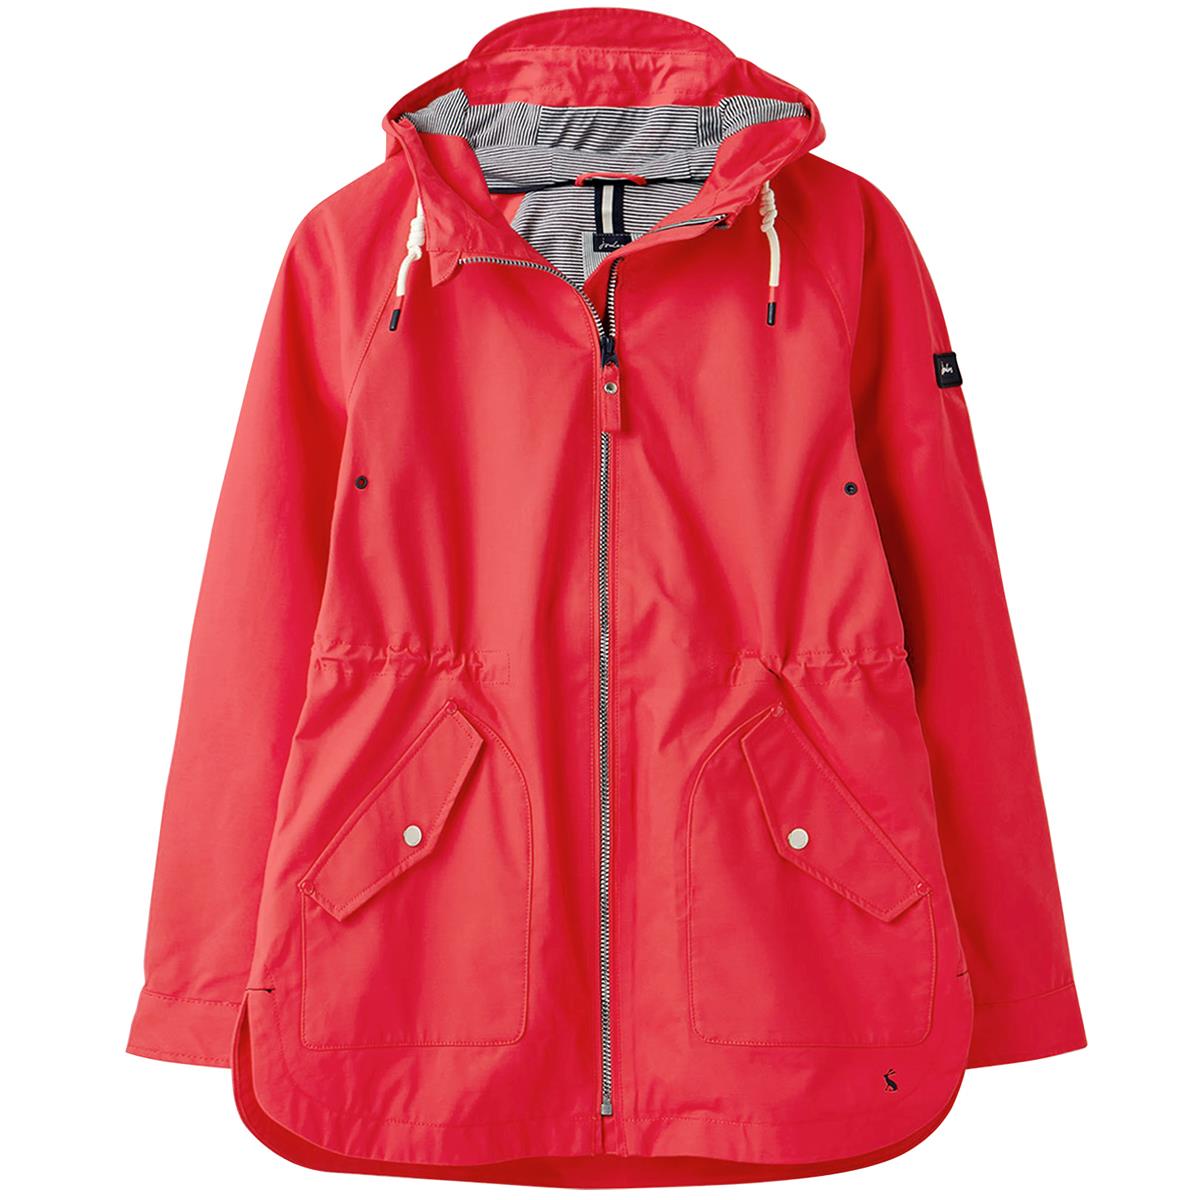 What is the proper care for the Joules Shoreside Coastal Waterproof Jacket?